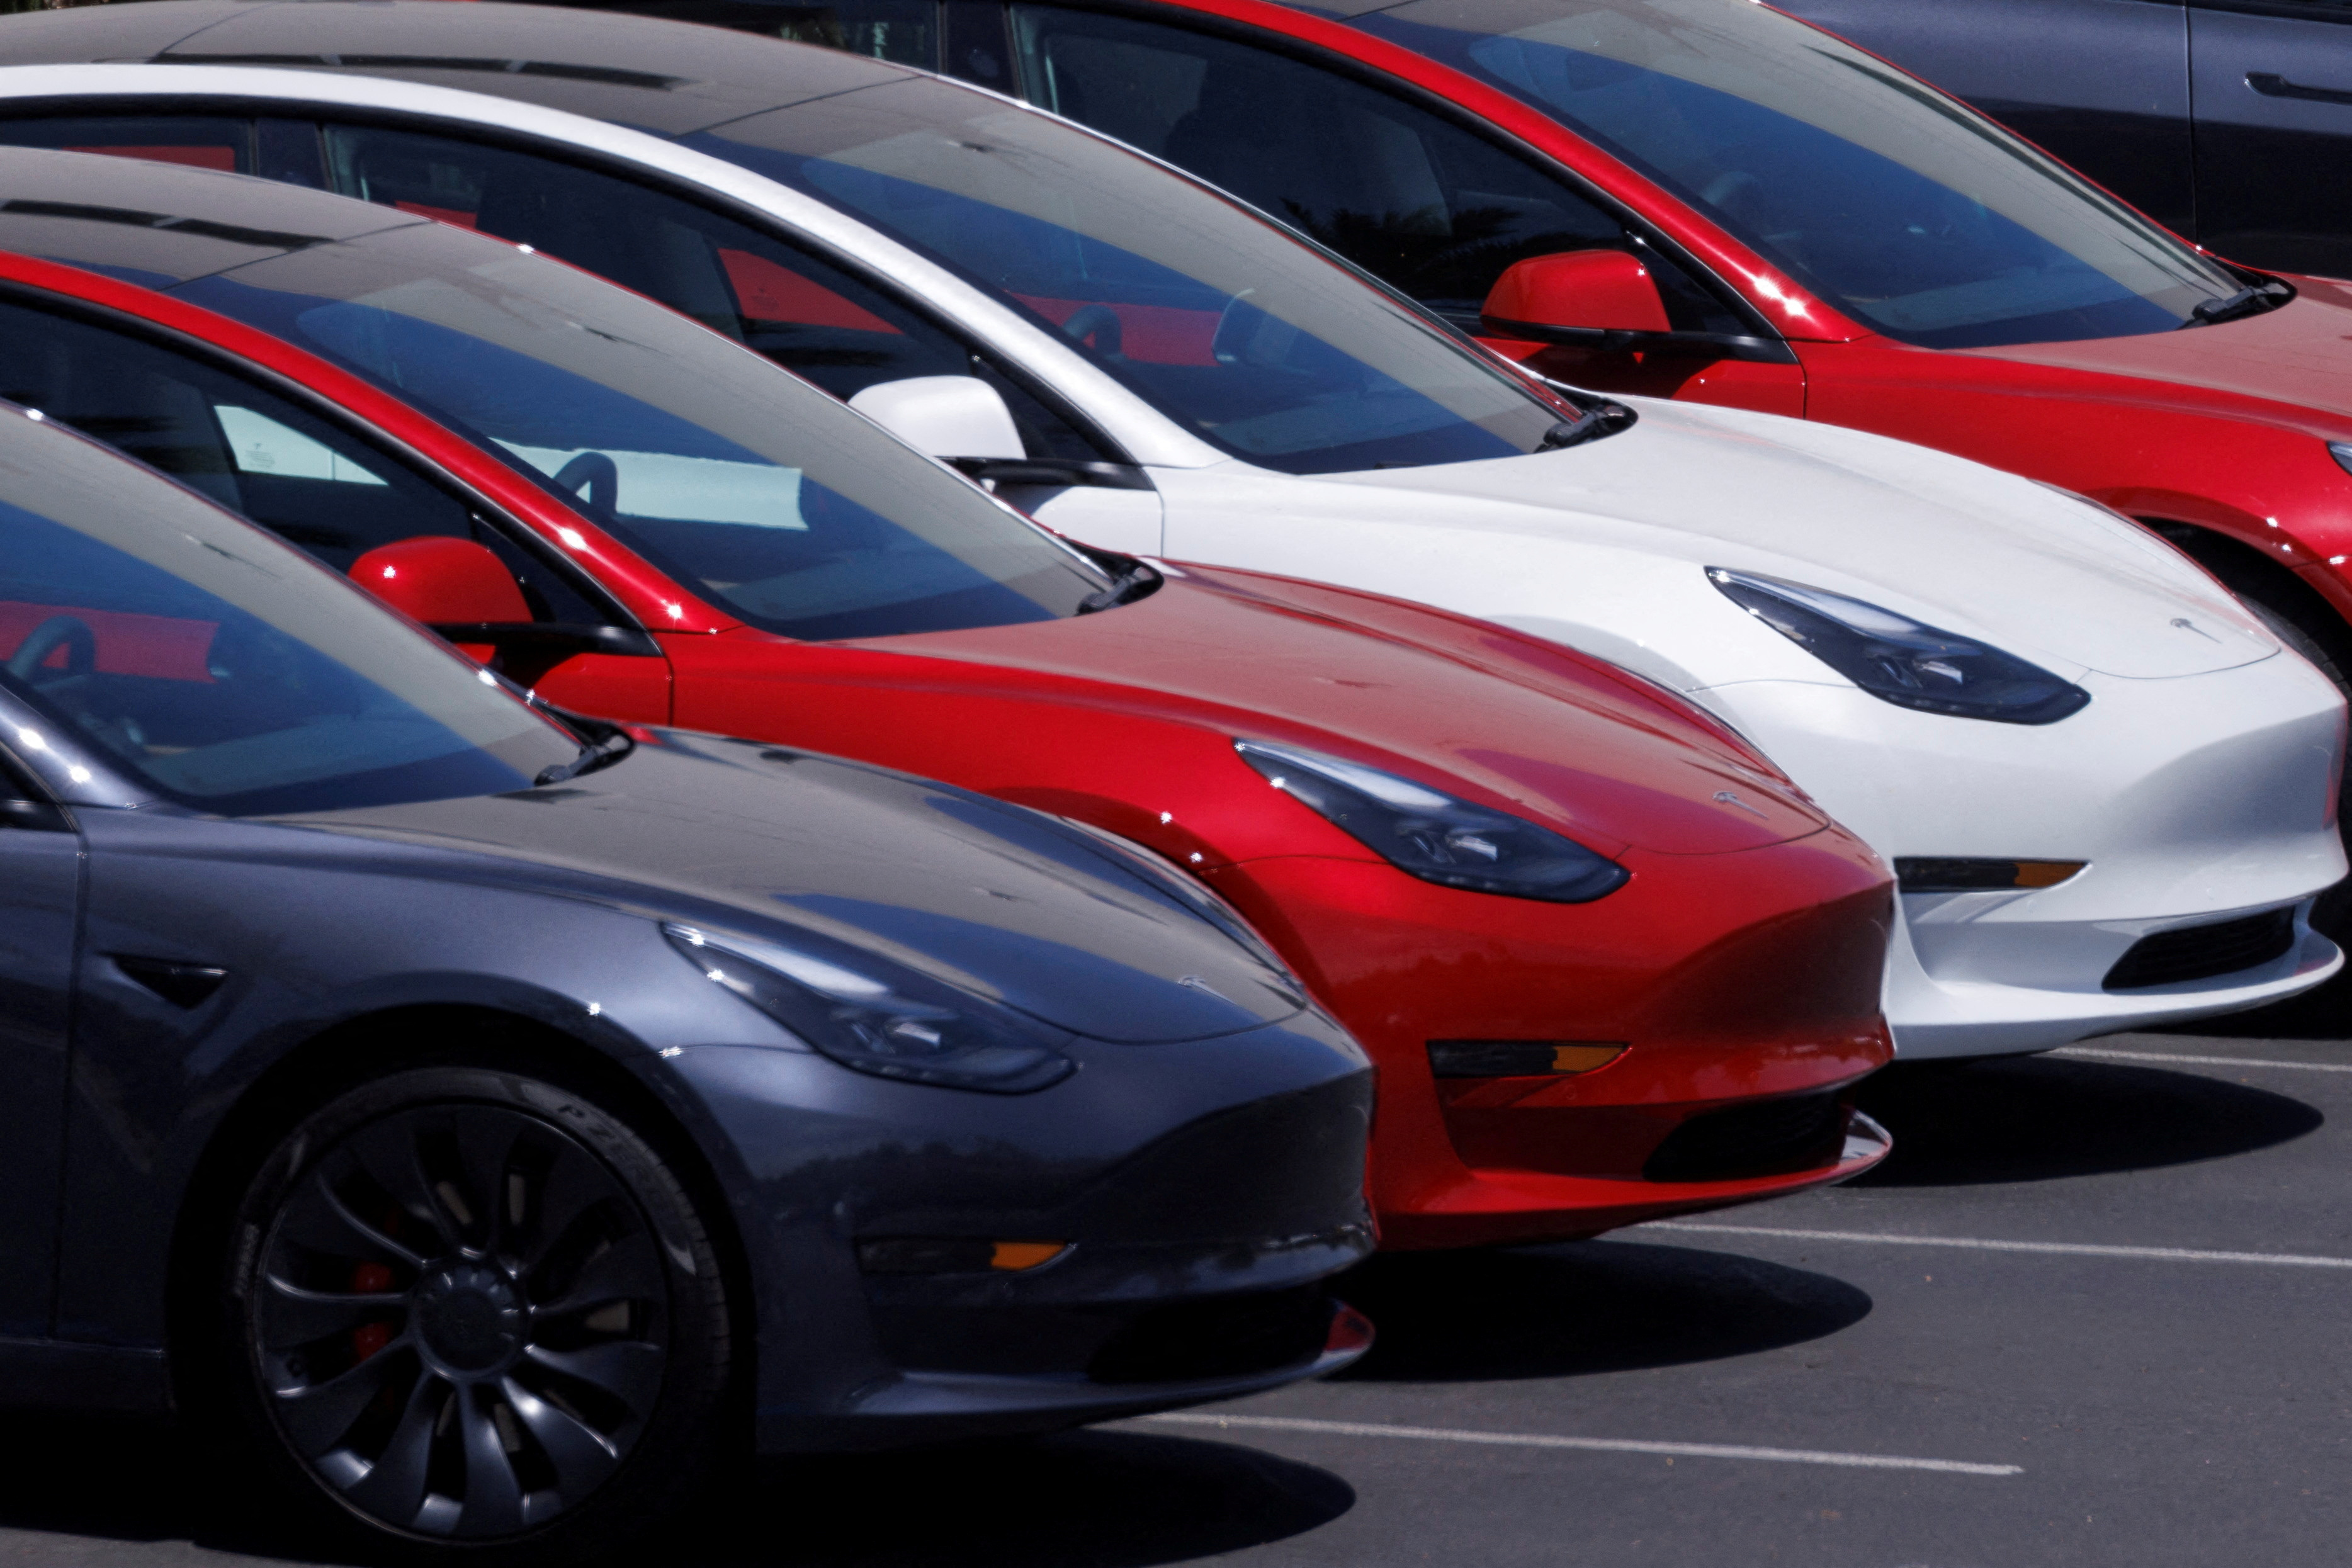 Tesla vehicles are displayed at a sales and service center in Vista, California